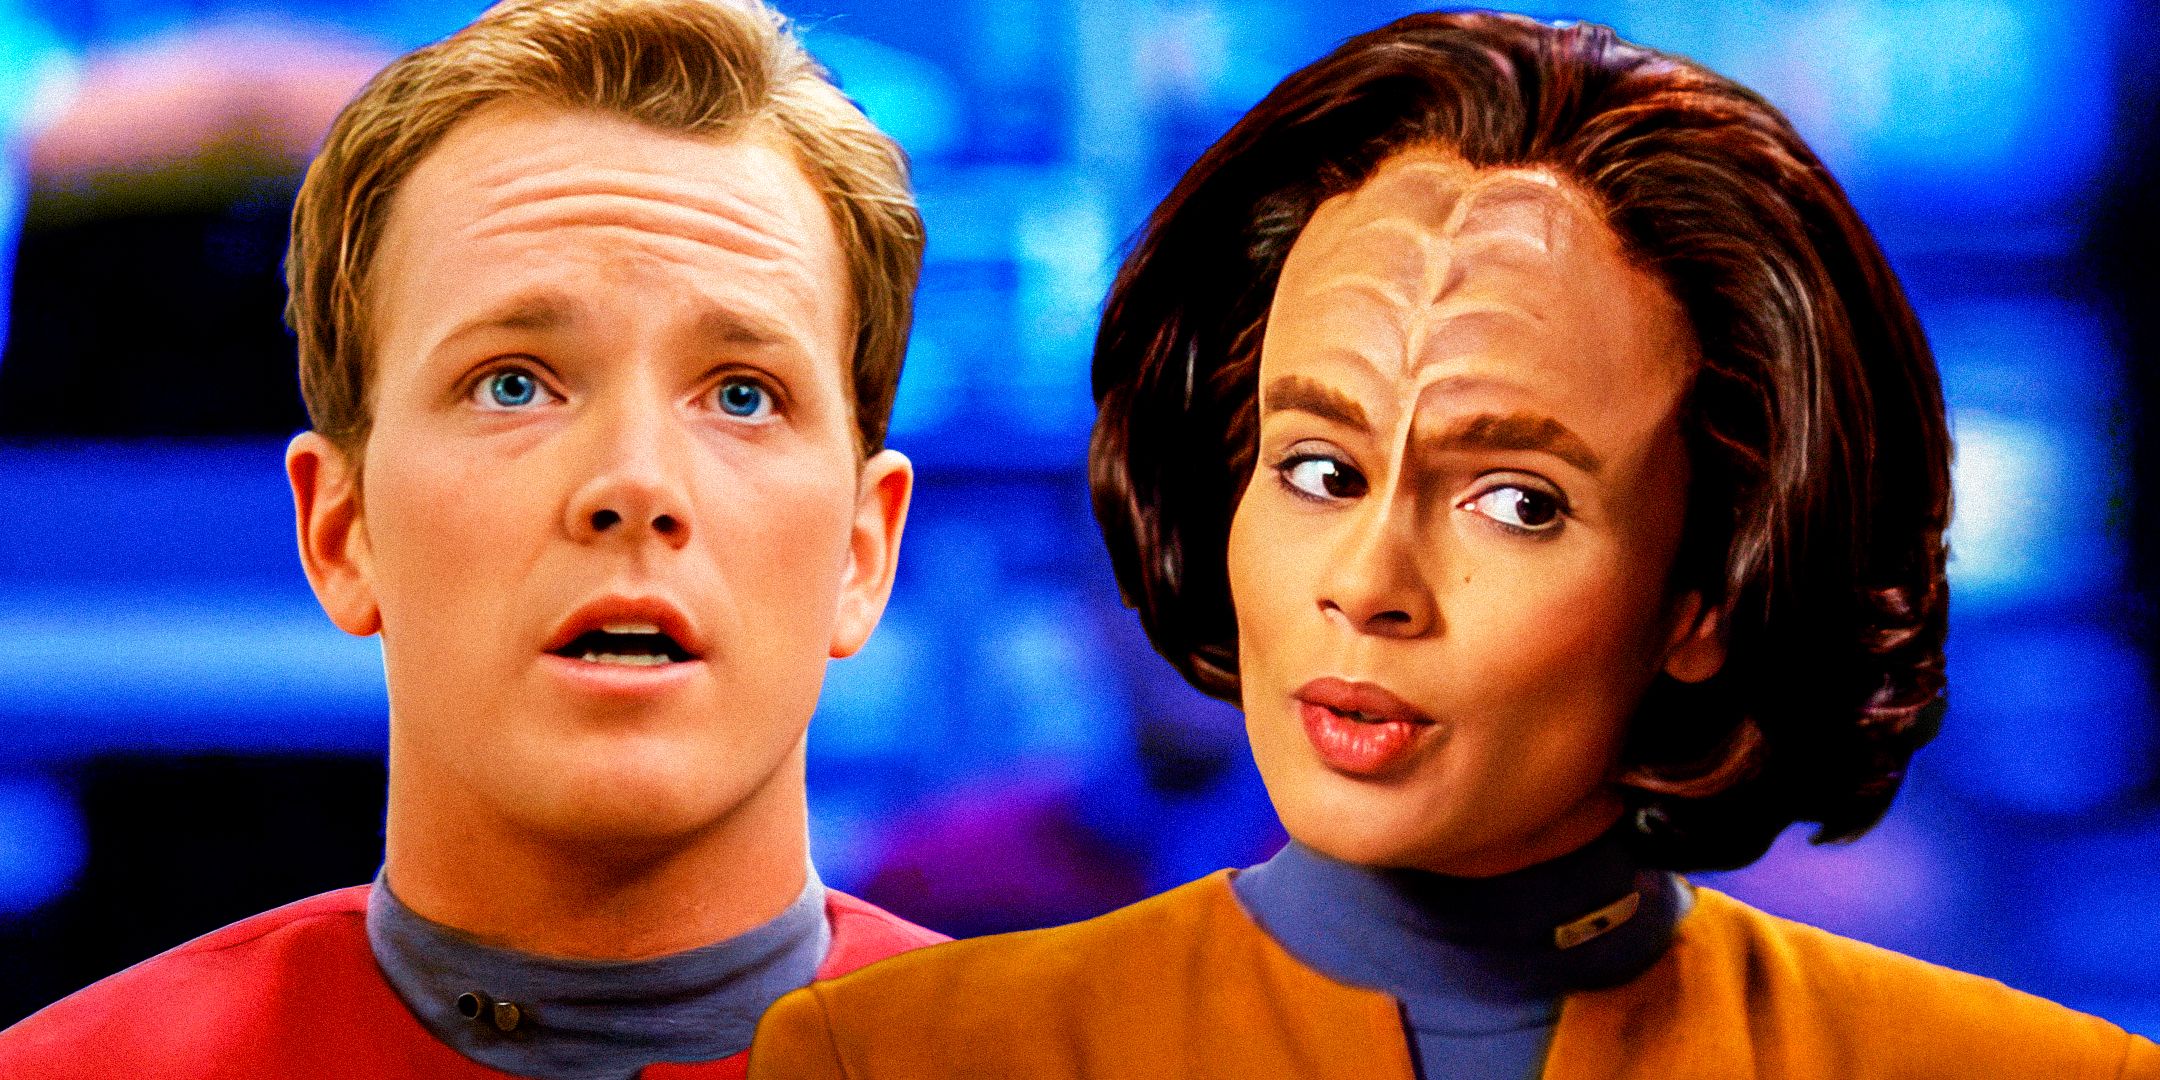 Robert Duncan McNeill as Tom Paris and Roxann Dawson as B'Elanna Torres from Star Trek: Voyager both make surprised faces on a blue background.